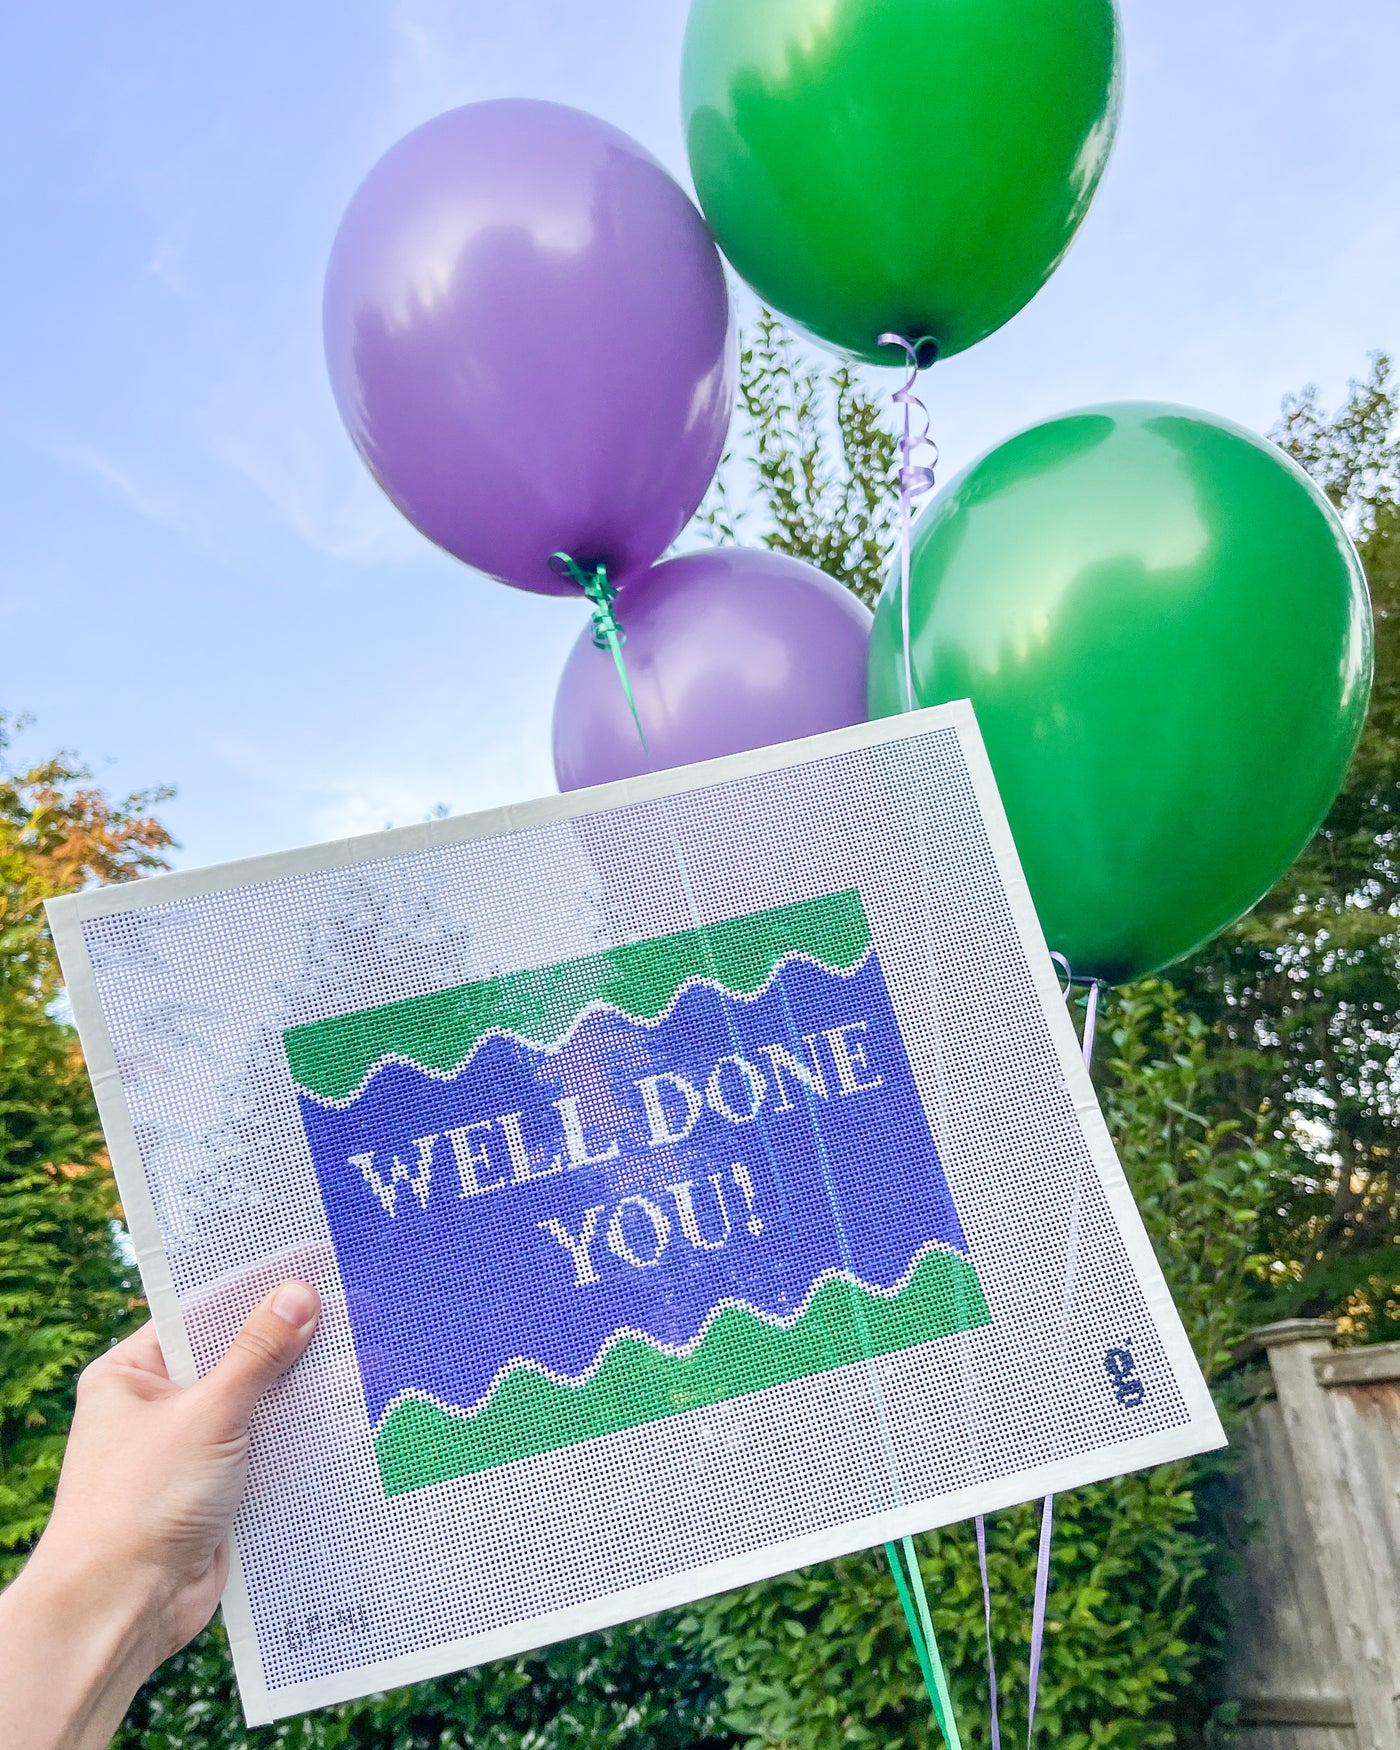 Purplish/blue & green needlepoint canvas with the words WELL DONE YOU in white font is held up in front of 4 balloons. 